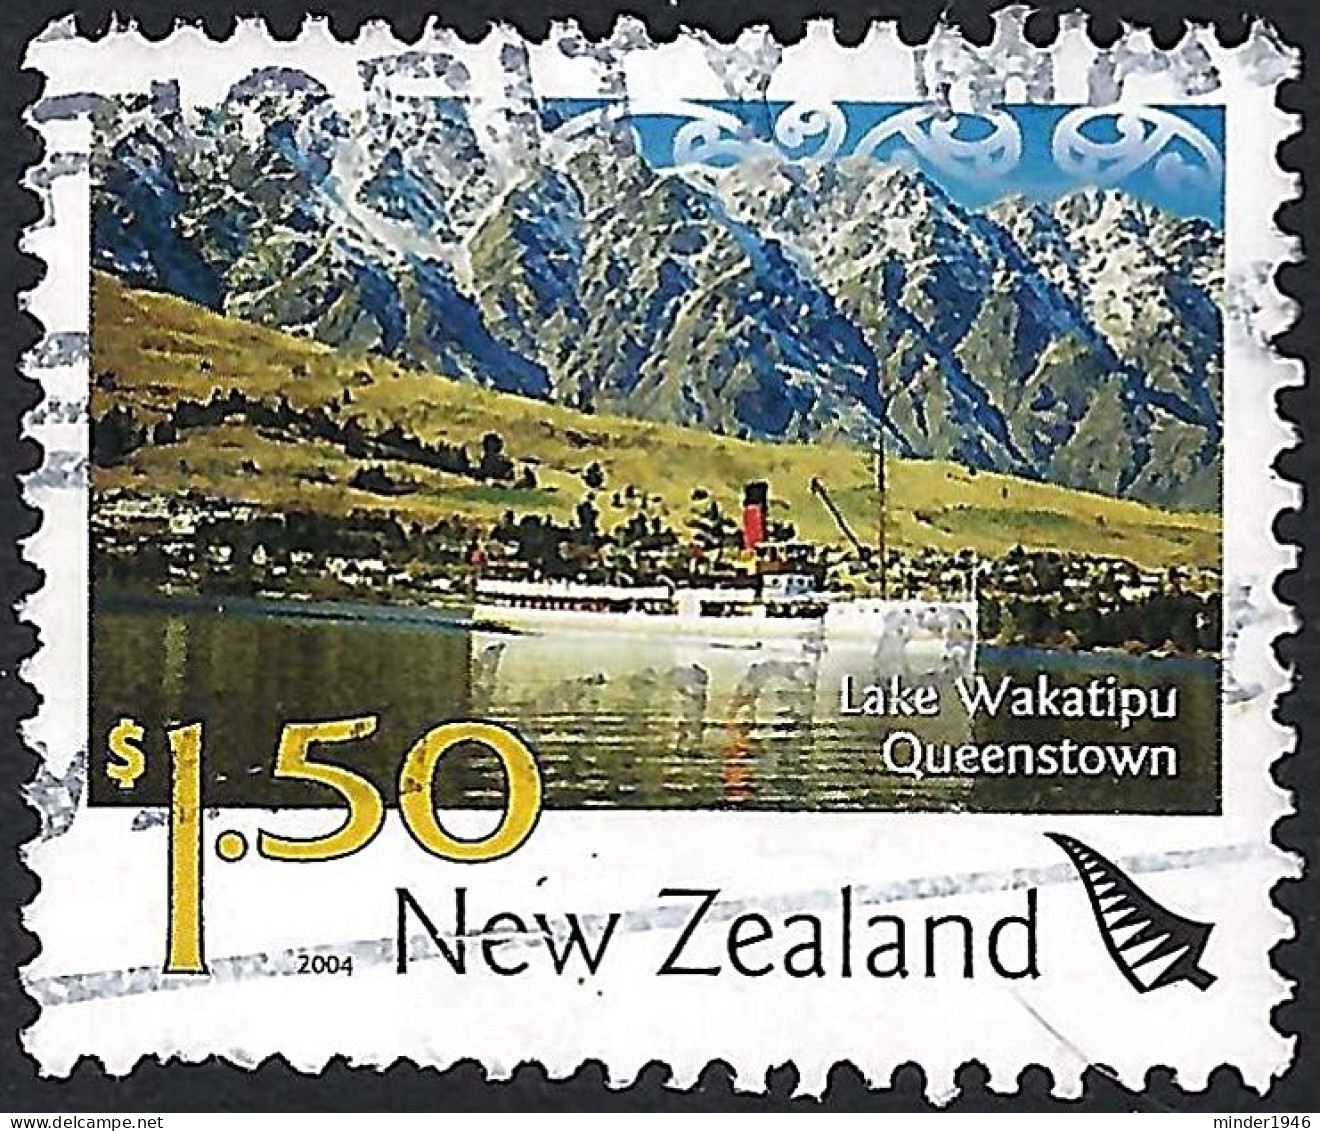 NEW ZEALAND 2004 QEII $1.50 Multicoloured, Tourist Attractions-Lake Watatipu Queenstown Used - Oblitérés